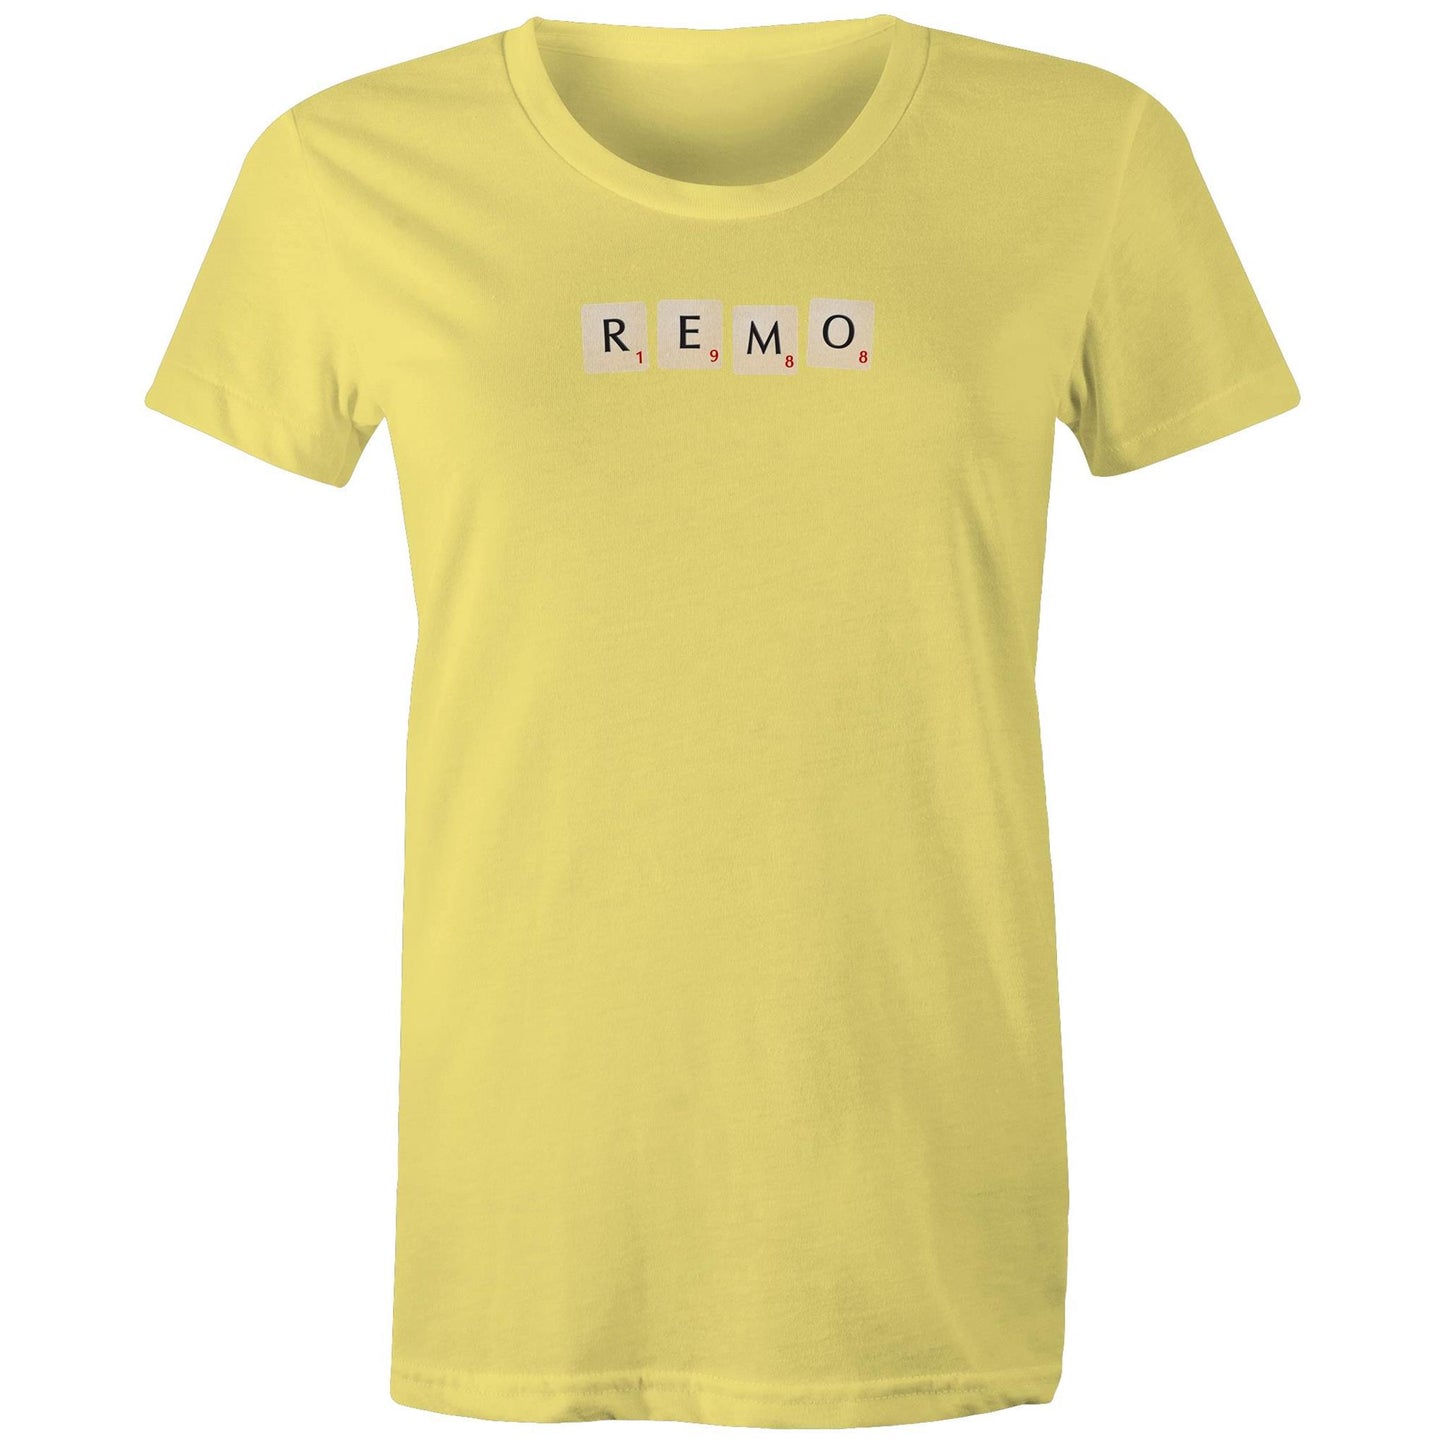 Scrabble REMO T Shirts for Women